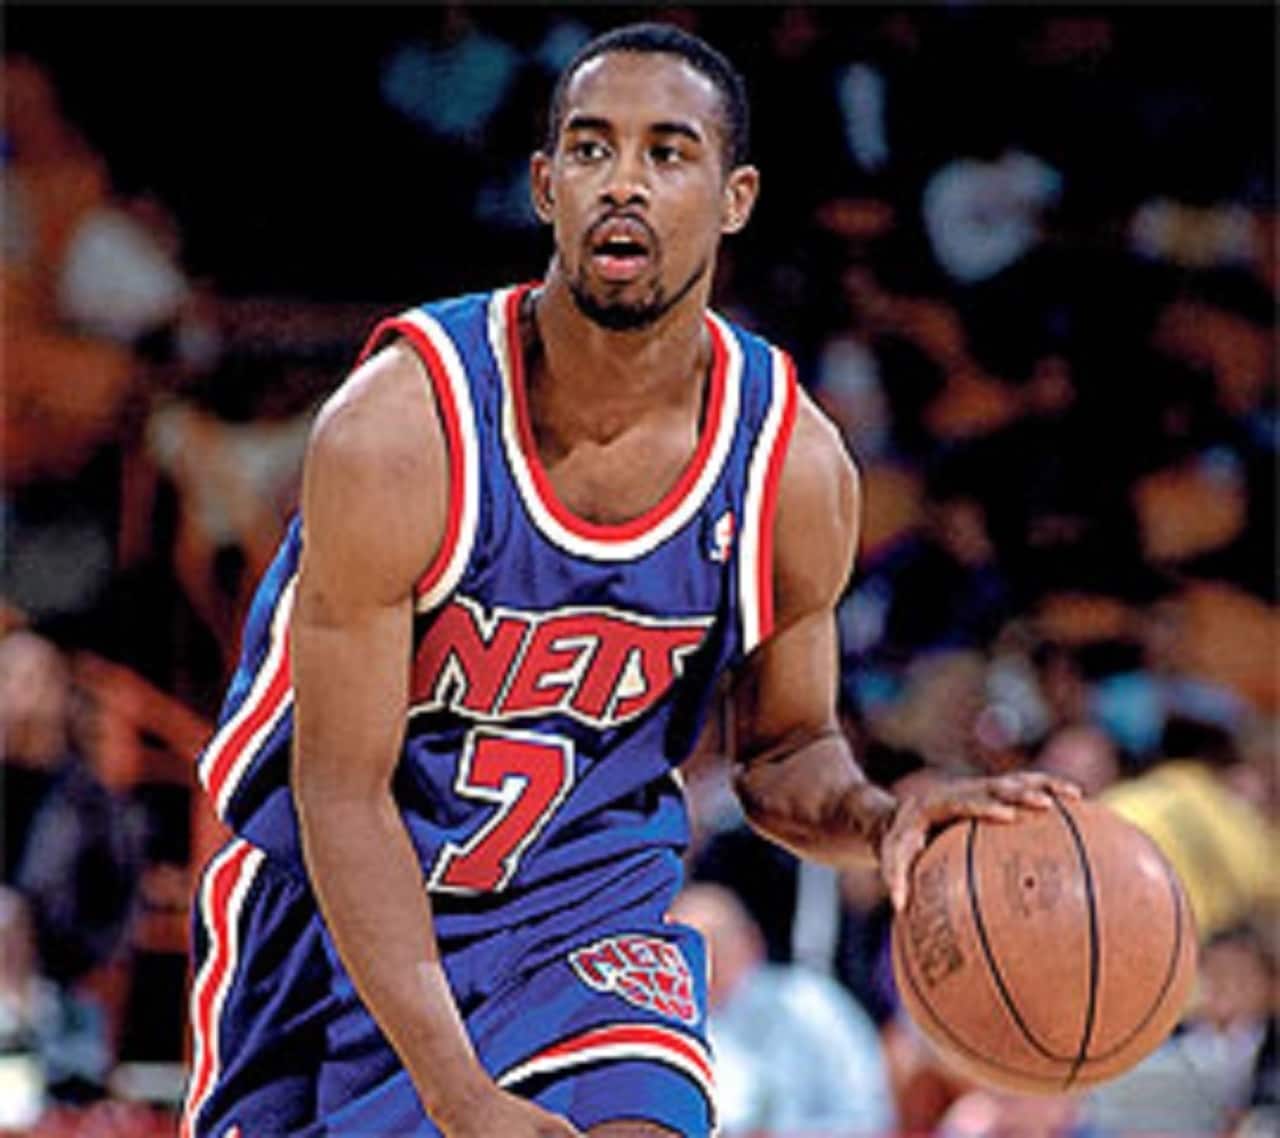 Norwood's Kenny Anderson turned 45 Oct. 9.